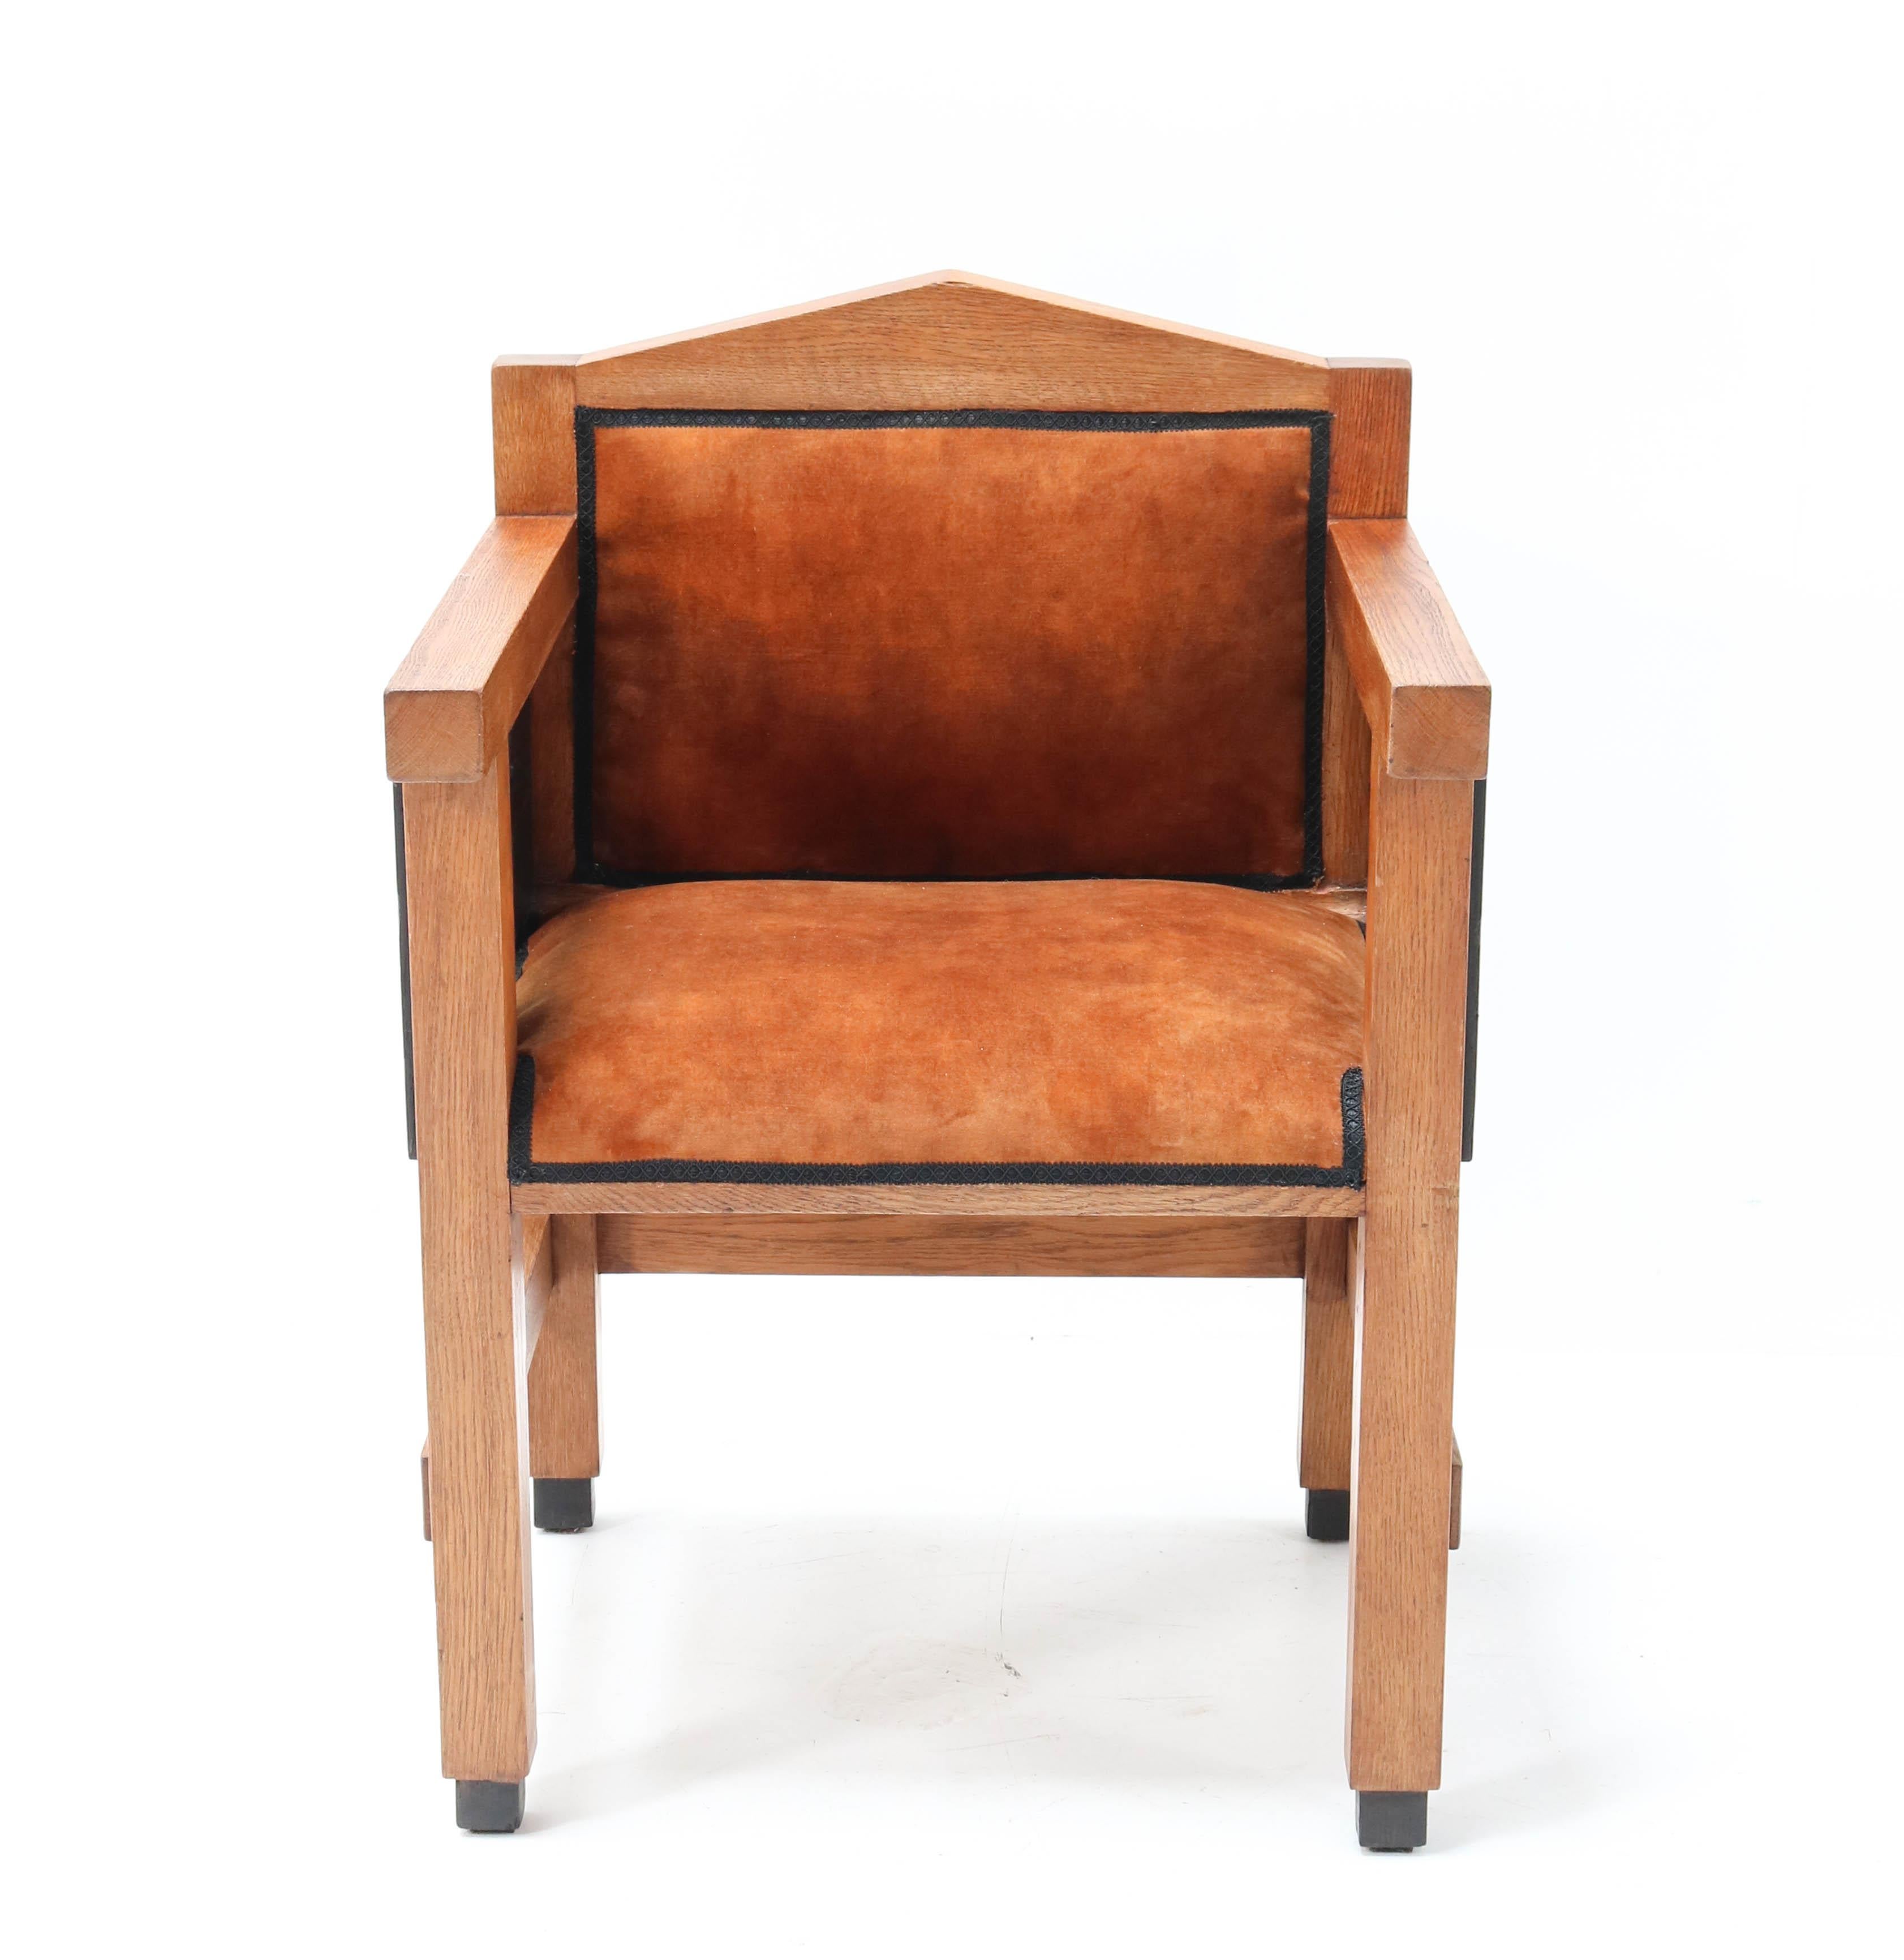 Magnificent and very rare Art Deco Haagse School armchair.
Design by Jacques Grubben.
Striking Dutch design from the 1930s.
Solid oak with original black lacquered details.
Re-upholstered with cognac colored velvet.
This wonderful piece of